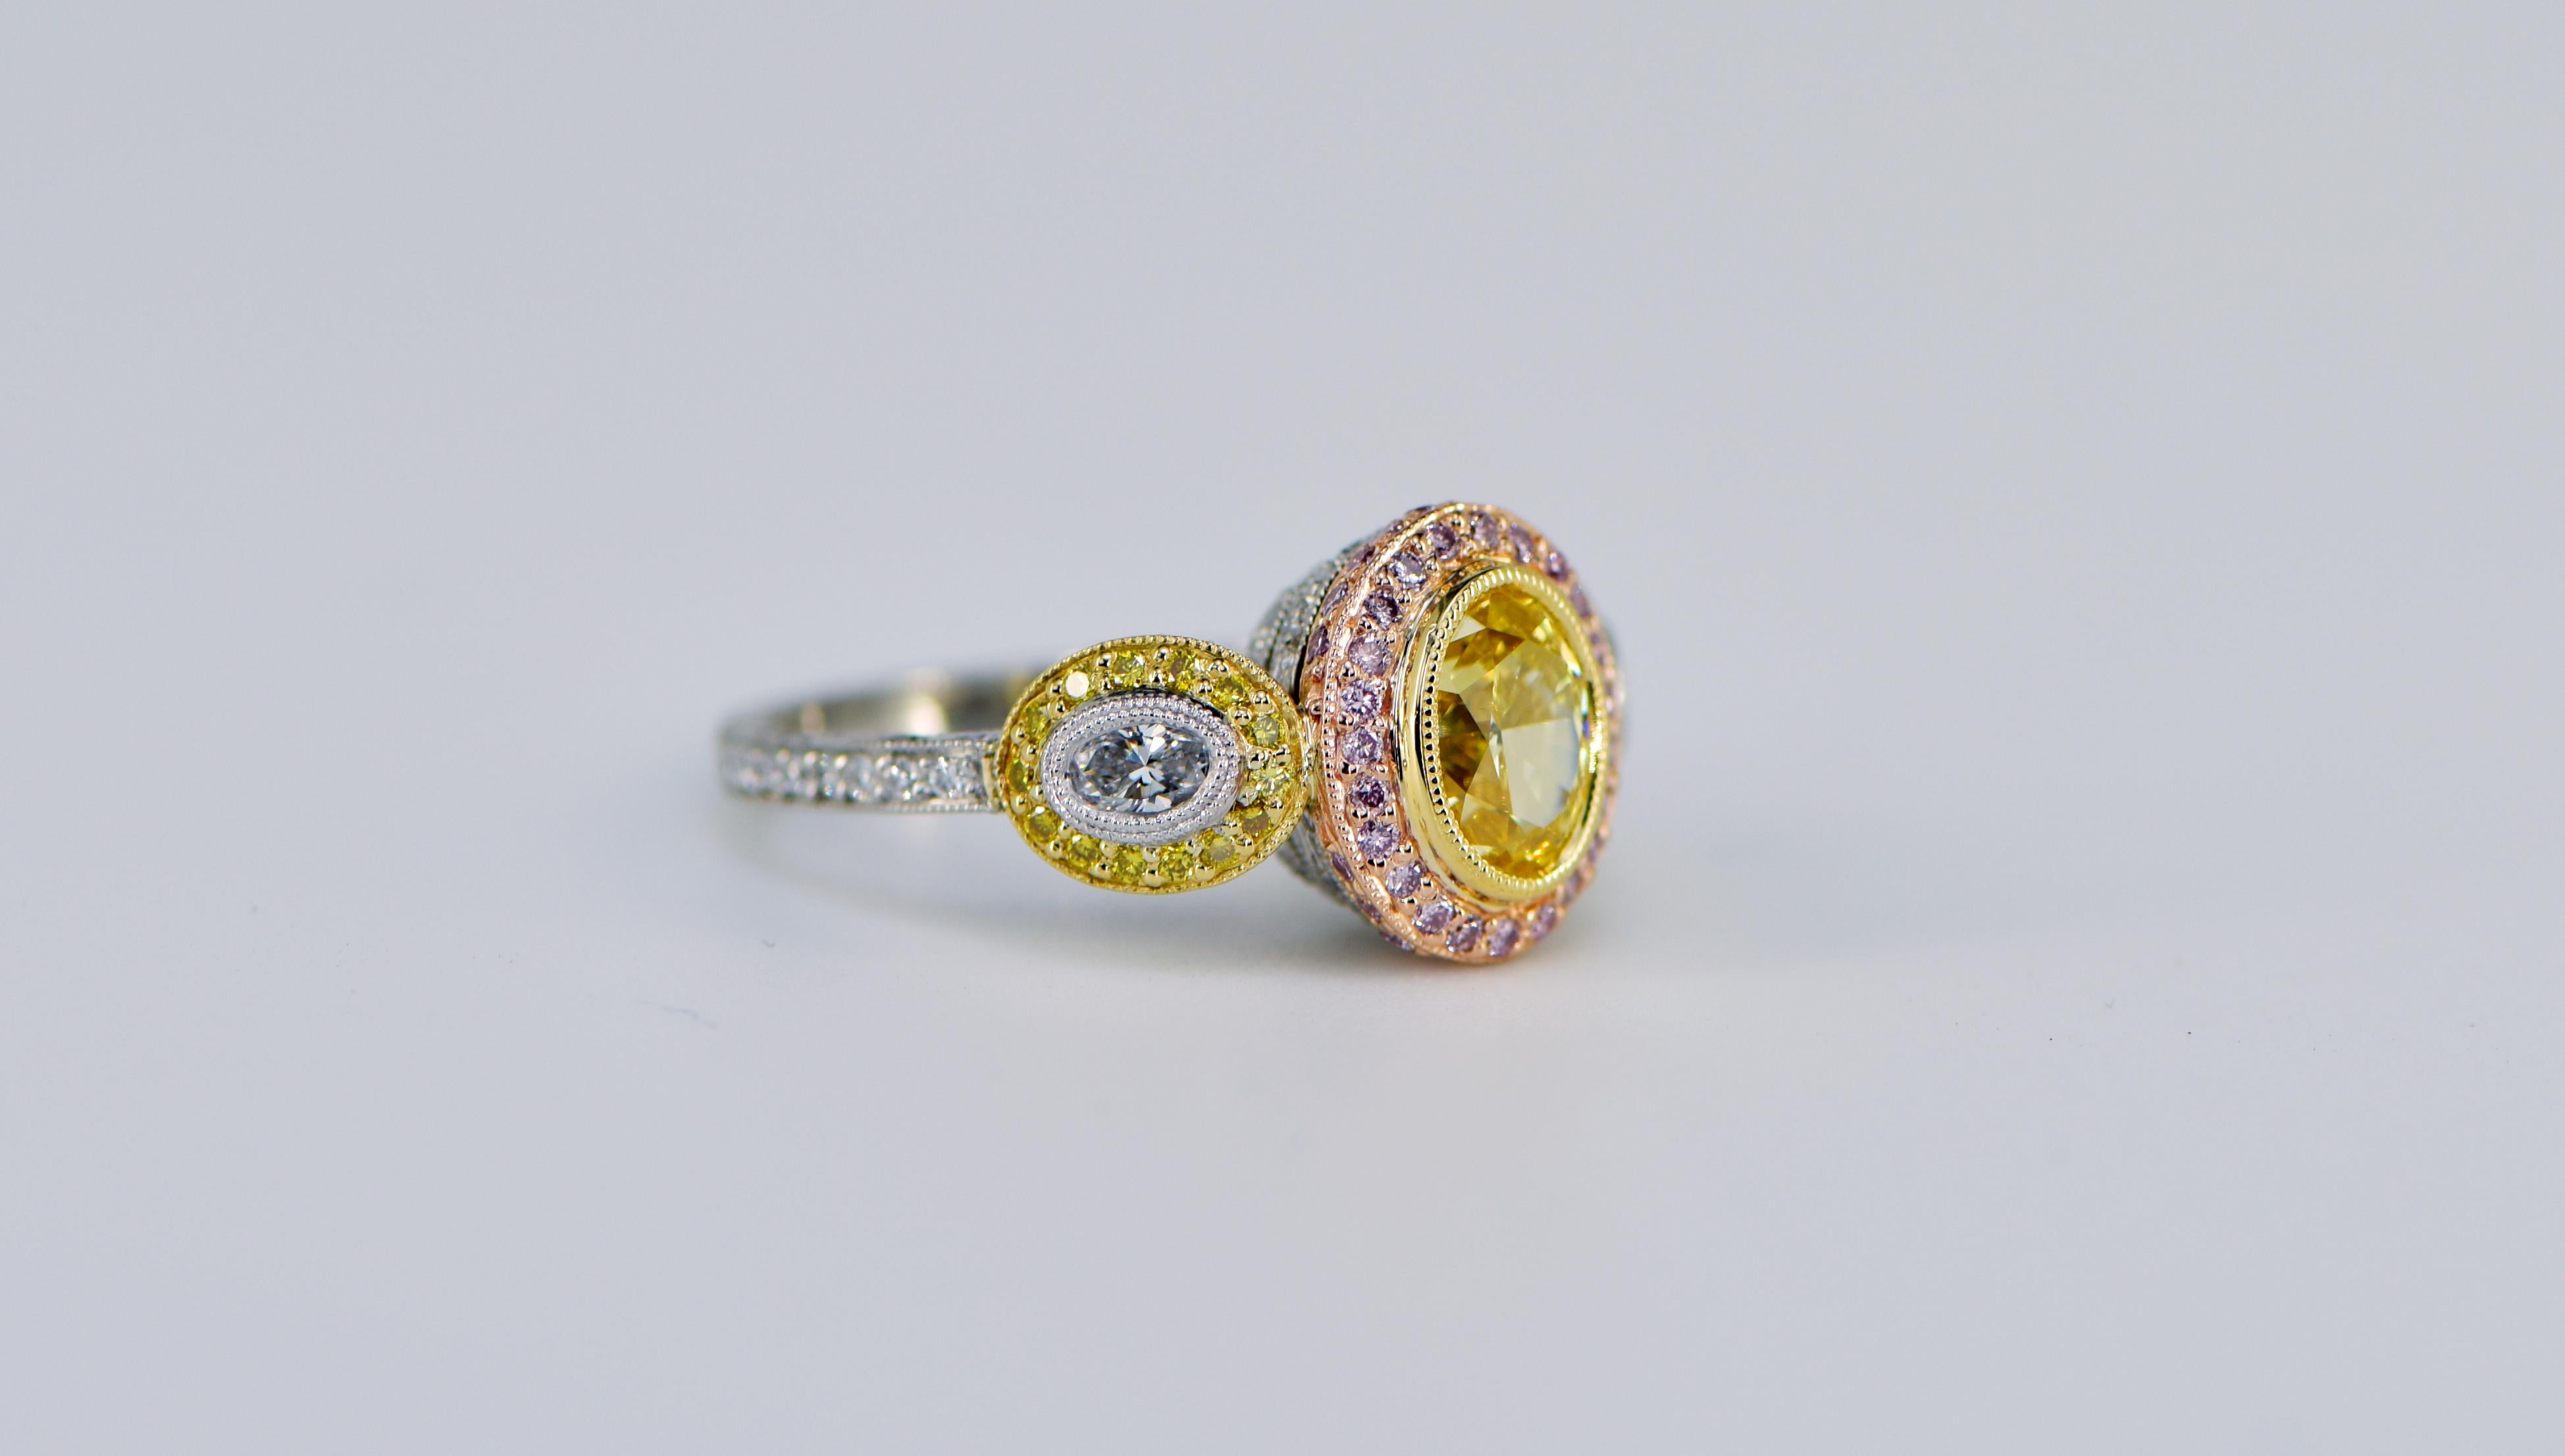 This exquisite GIA certified diamond ring is a true work of art, featuring a stunning 1.27ct oval fancy intense yellow diamond set in the luxurious metal of platinum. The stunning center diamond is accentuated by two matching white oval diamonds,